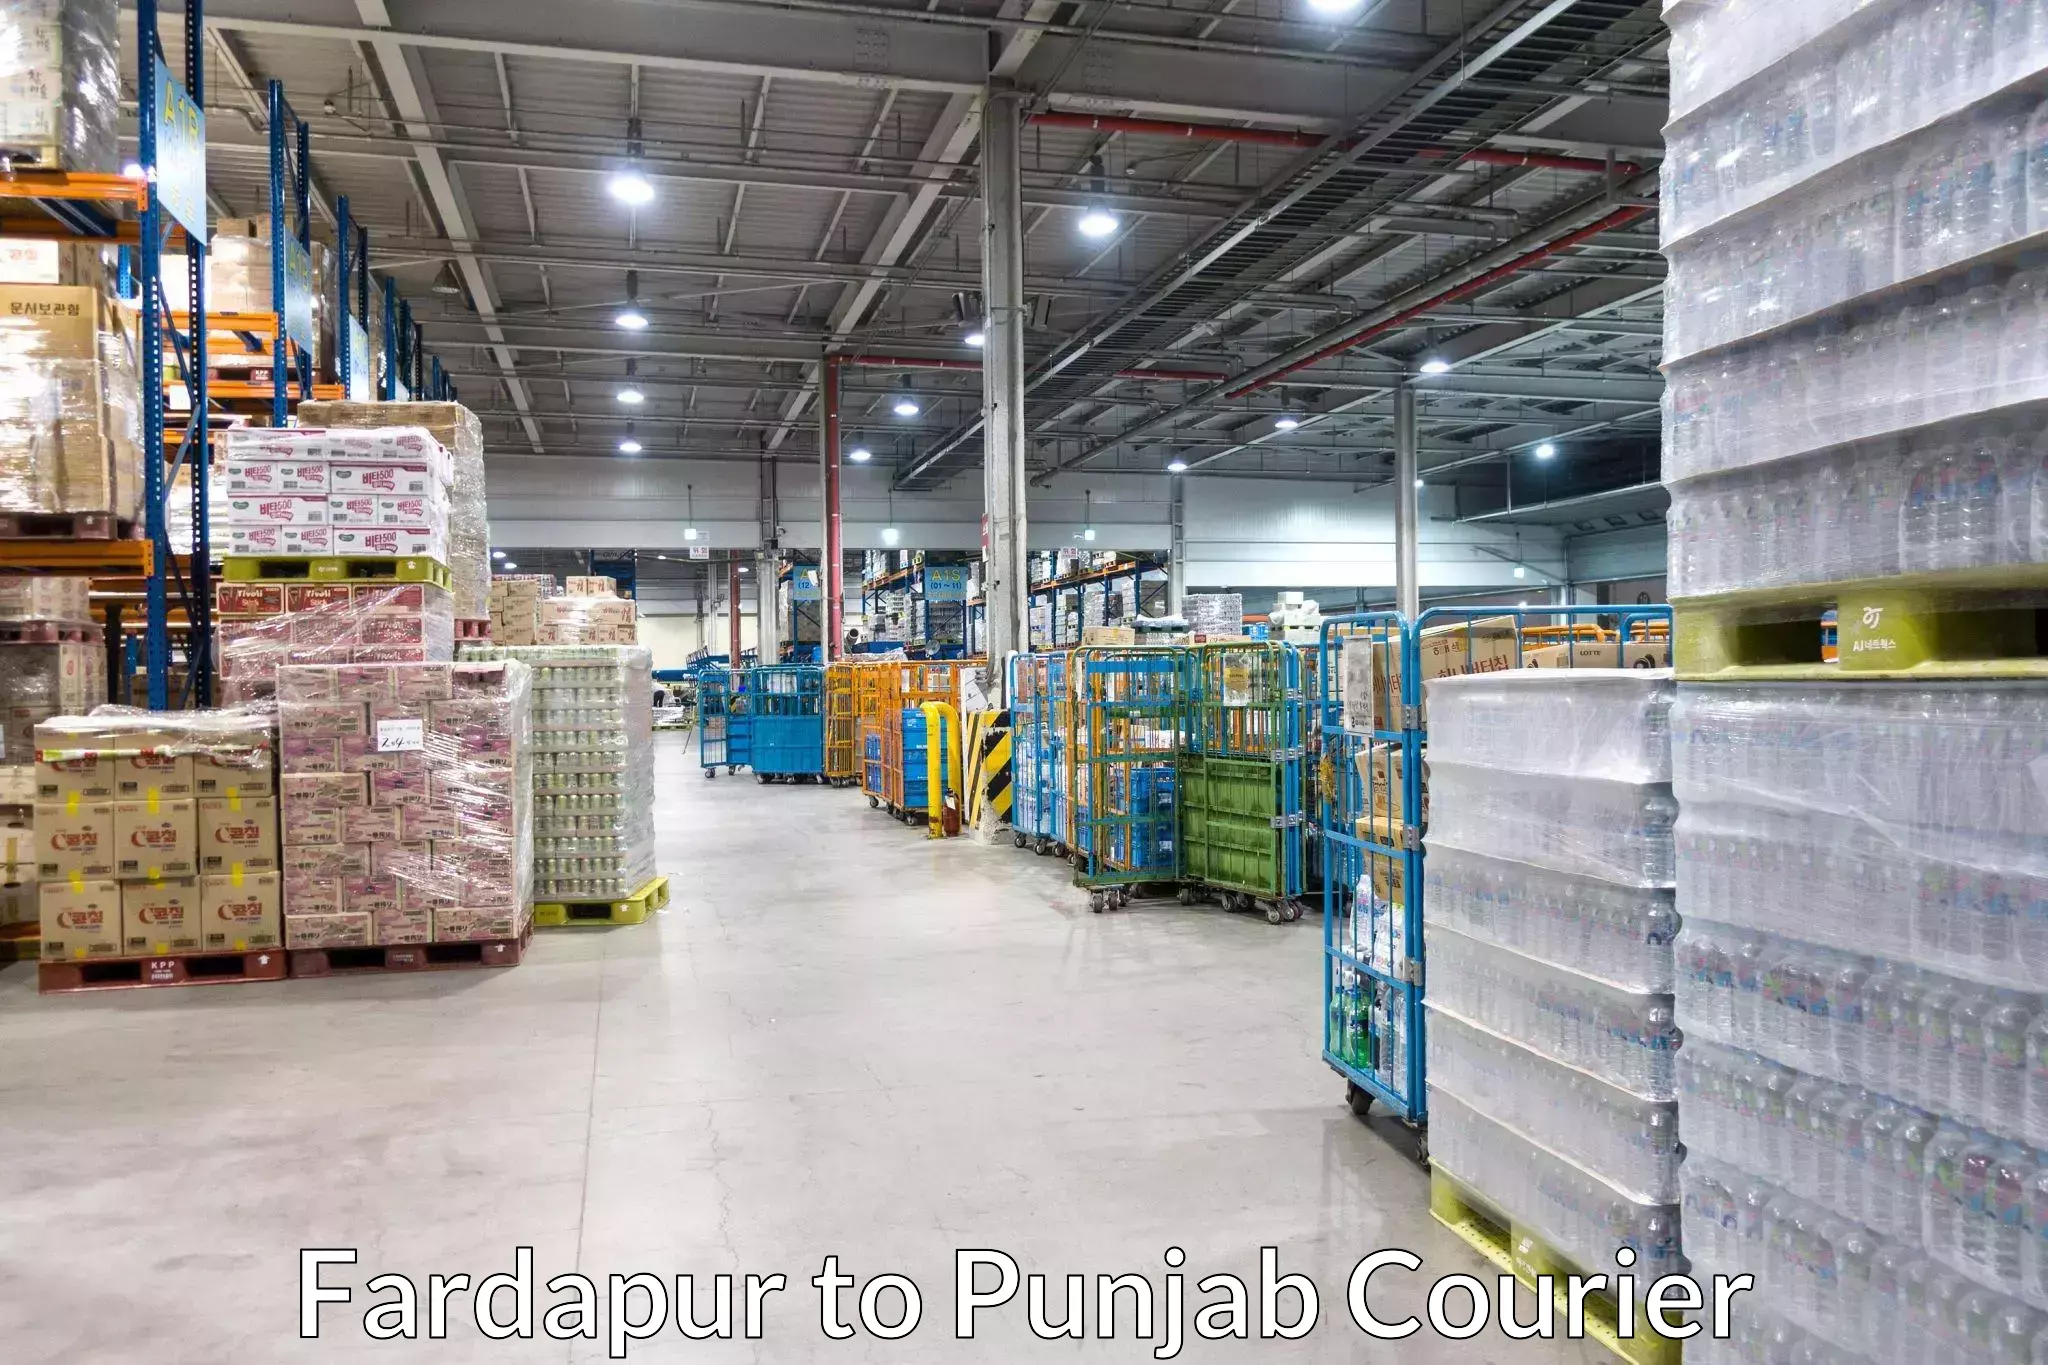 State-of-the-art courier technology Fardapur to Zirakpur